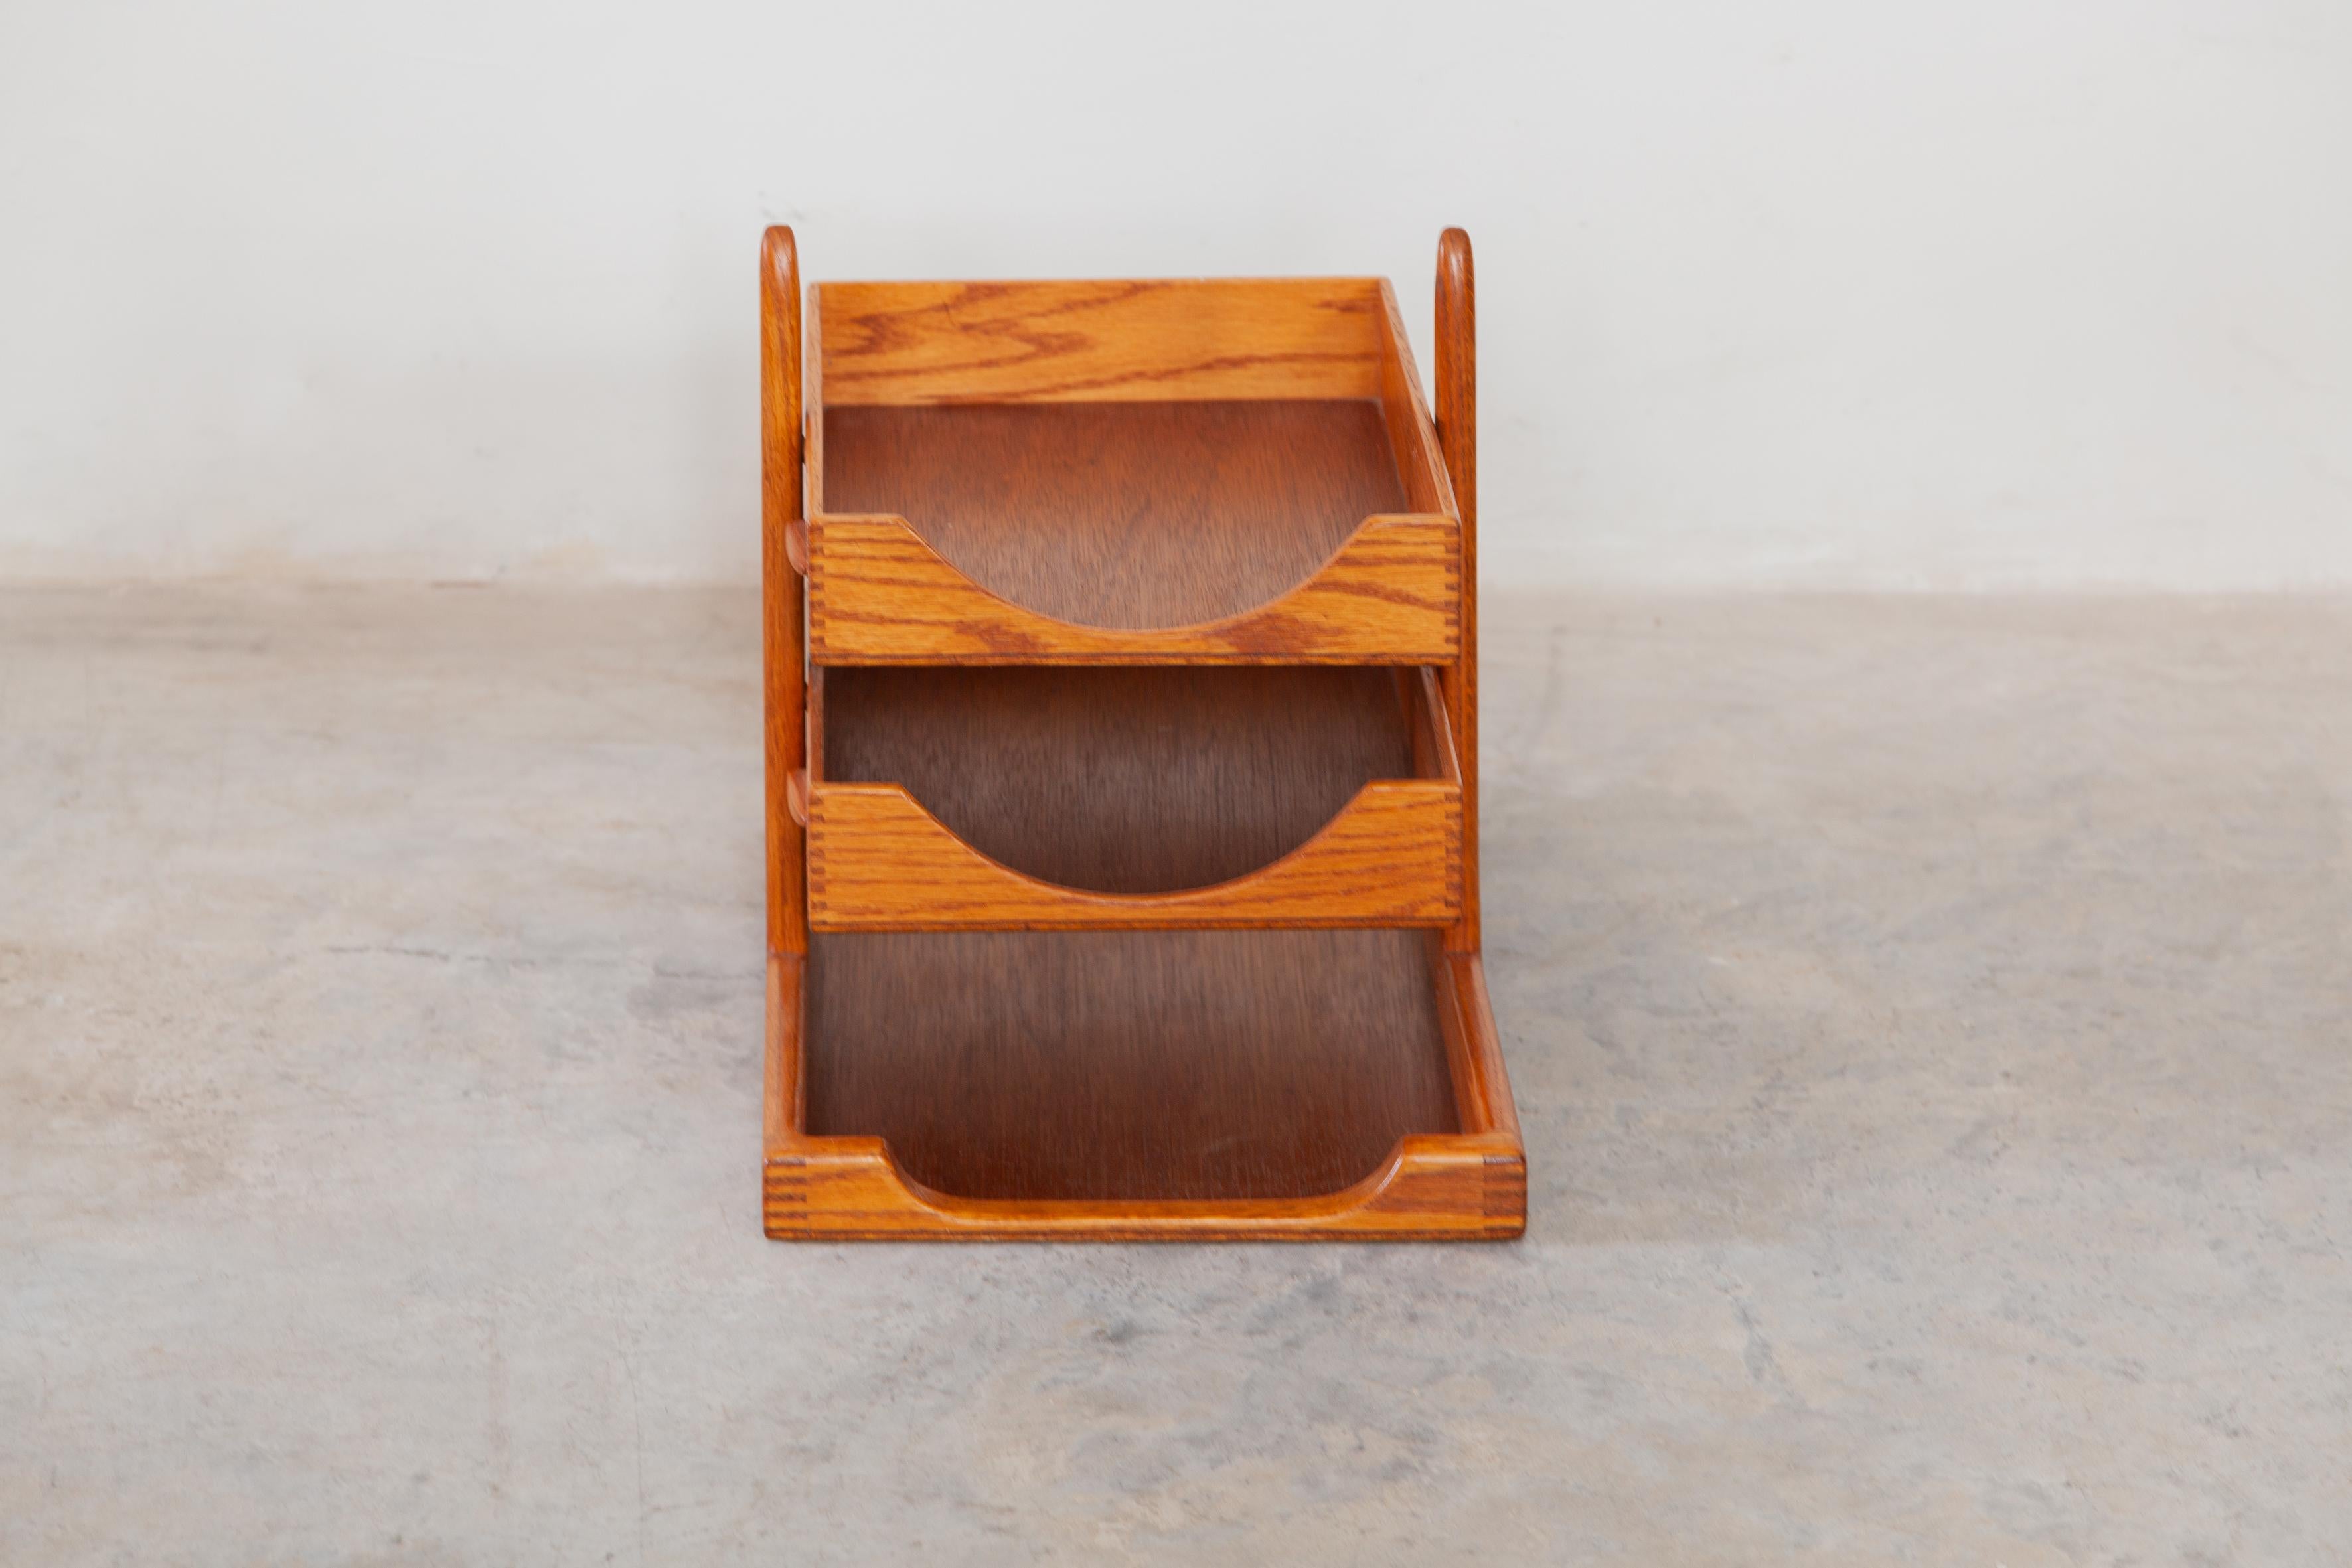 Danish modern functional accessory teak desk organizer or letter tray. There are three letter trays in the holder .The piece has a very light colored finish and is in good vintage condition.